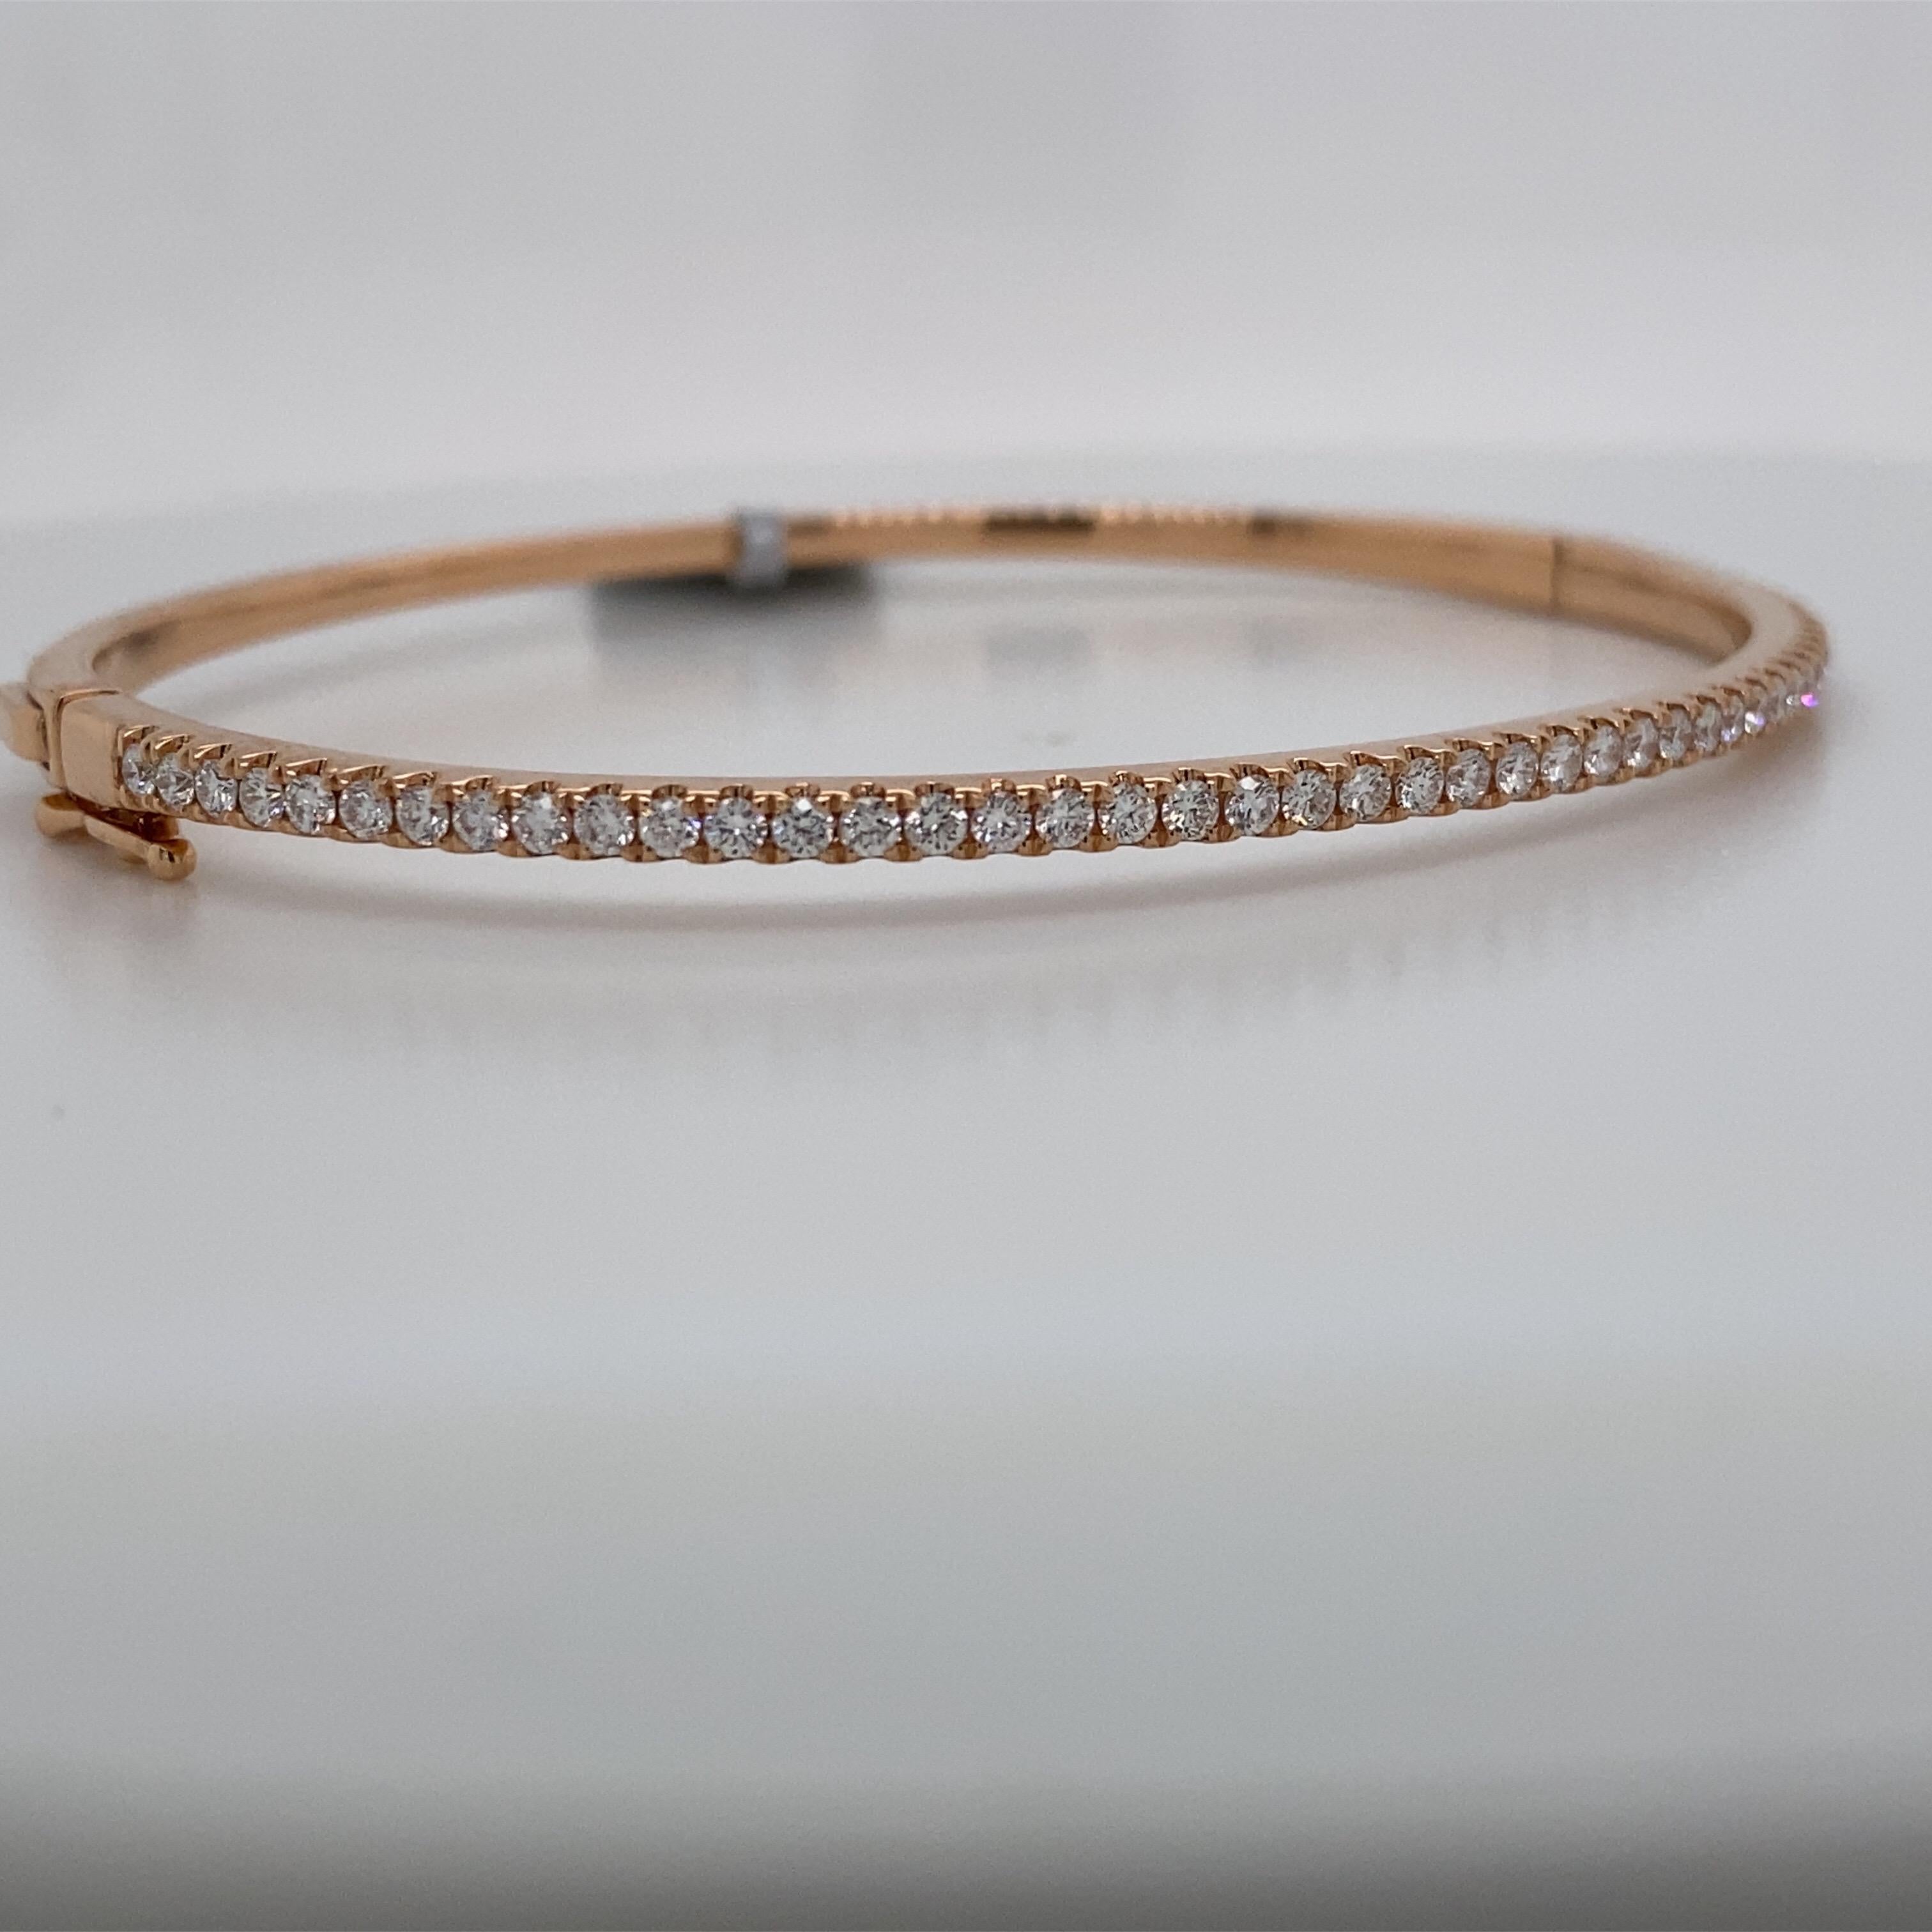 18K Rose gold bangle bracelet featuring 45 round brilliants weighing 0.85 carats.

Great for stacking!
Available in yellow & white gold. 